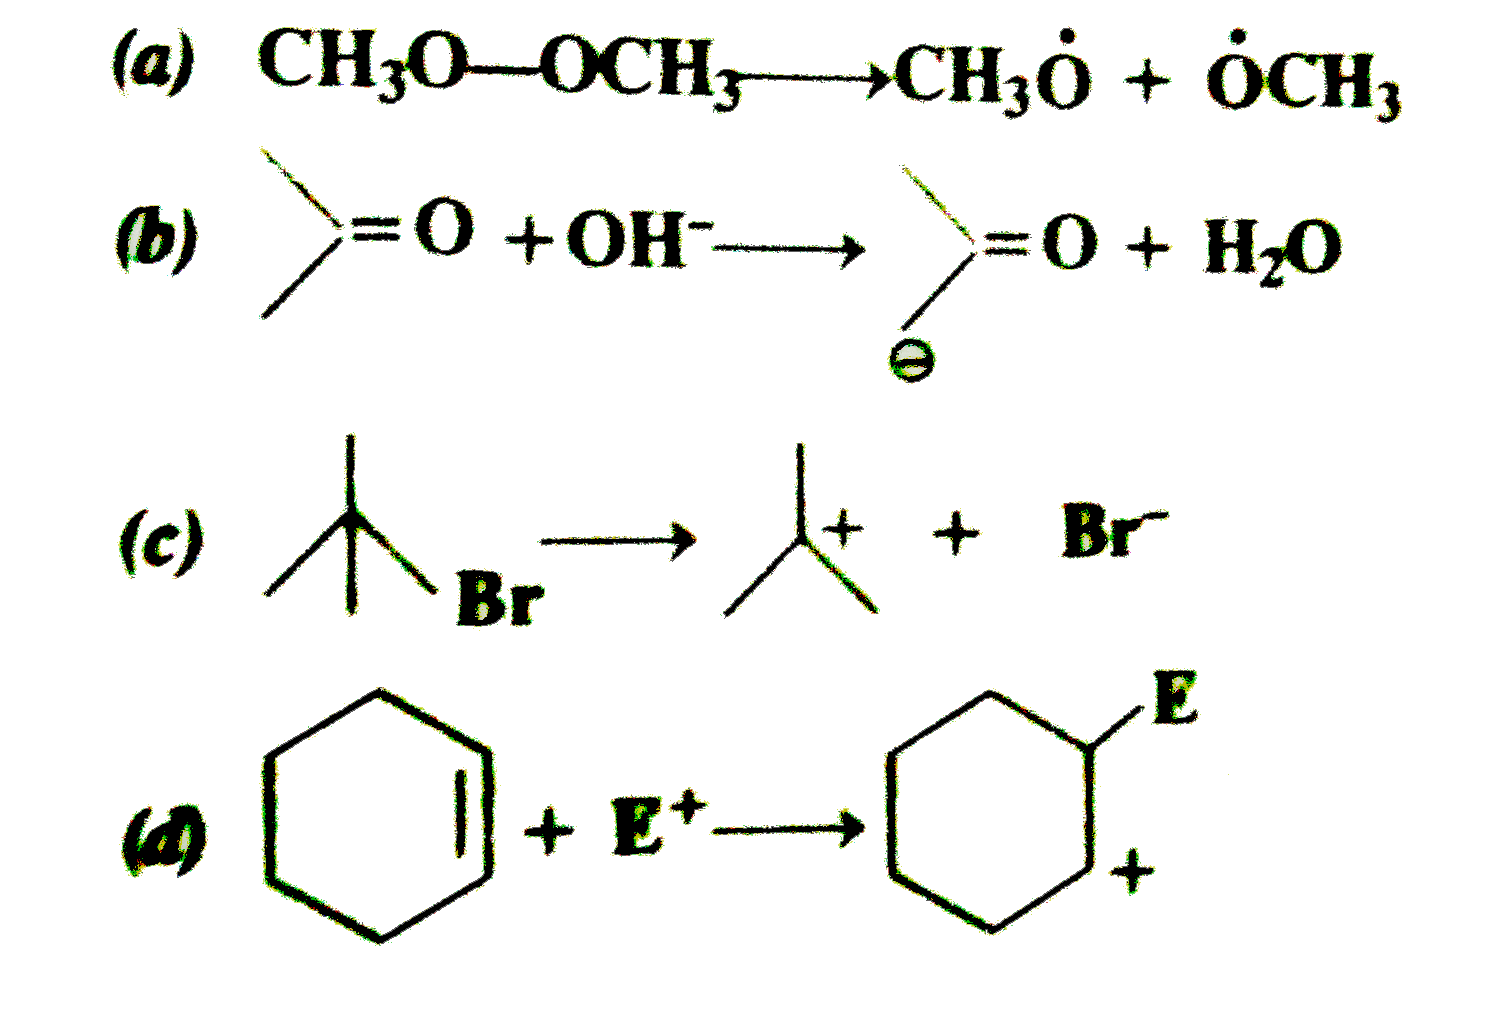 Classify each of the following as homolysis as homolysis or heterolysis. Identify the reaction intermediates produced , as free radical, carbocation and carbanion.